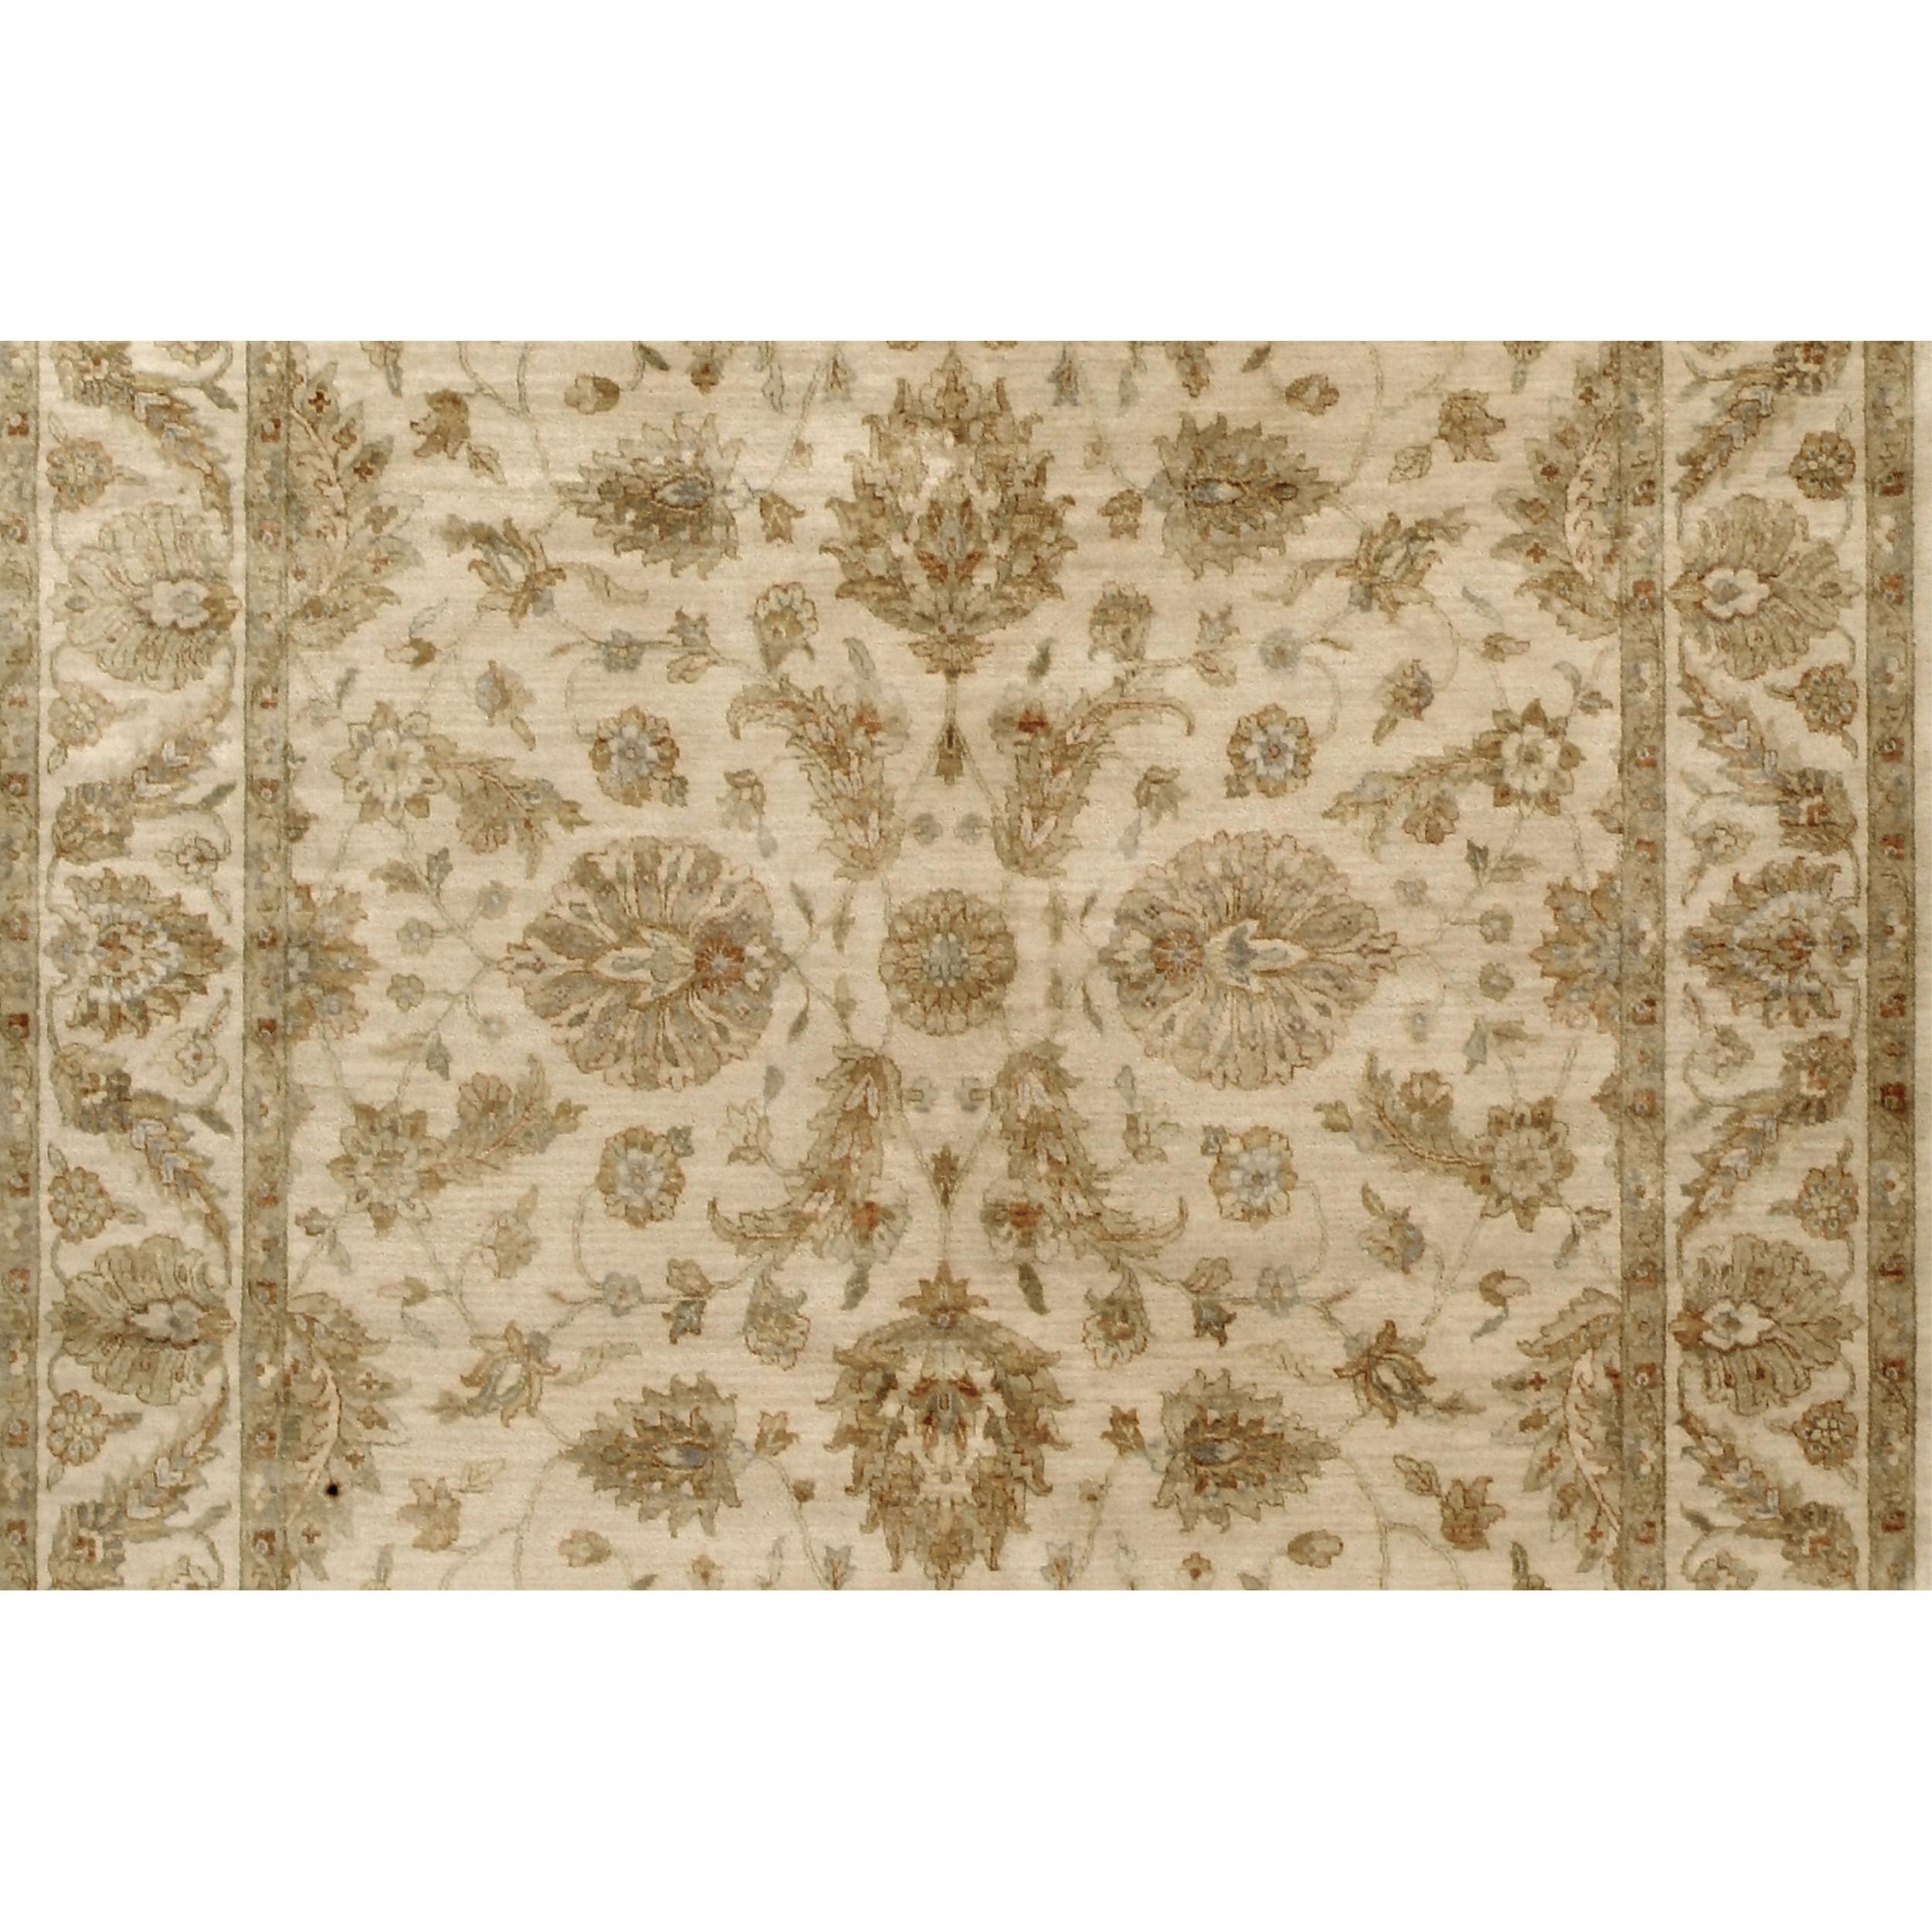 Indian Luxury Traditional Hand-Knotted Cream 12X24 Rug For Sale